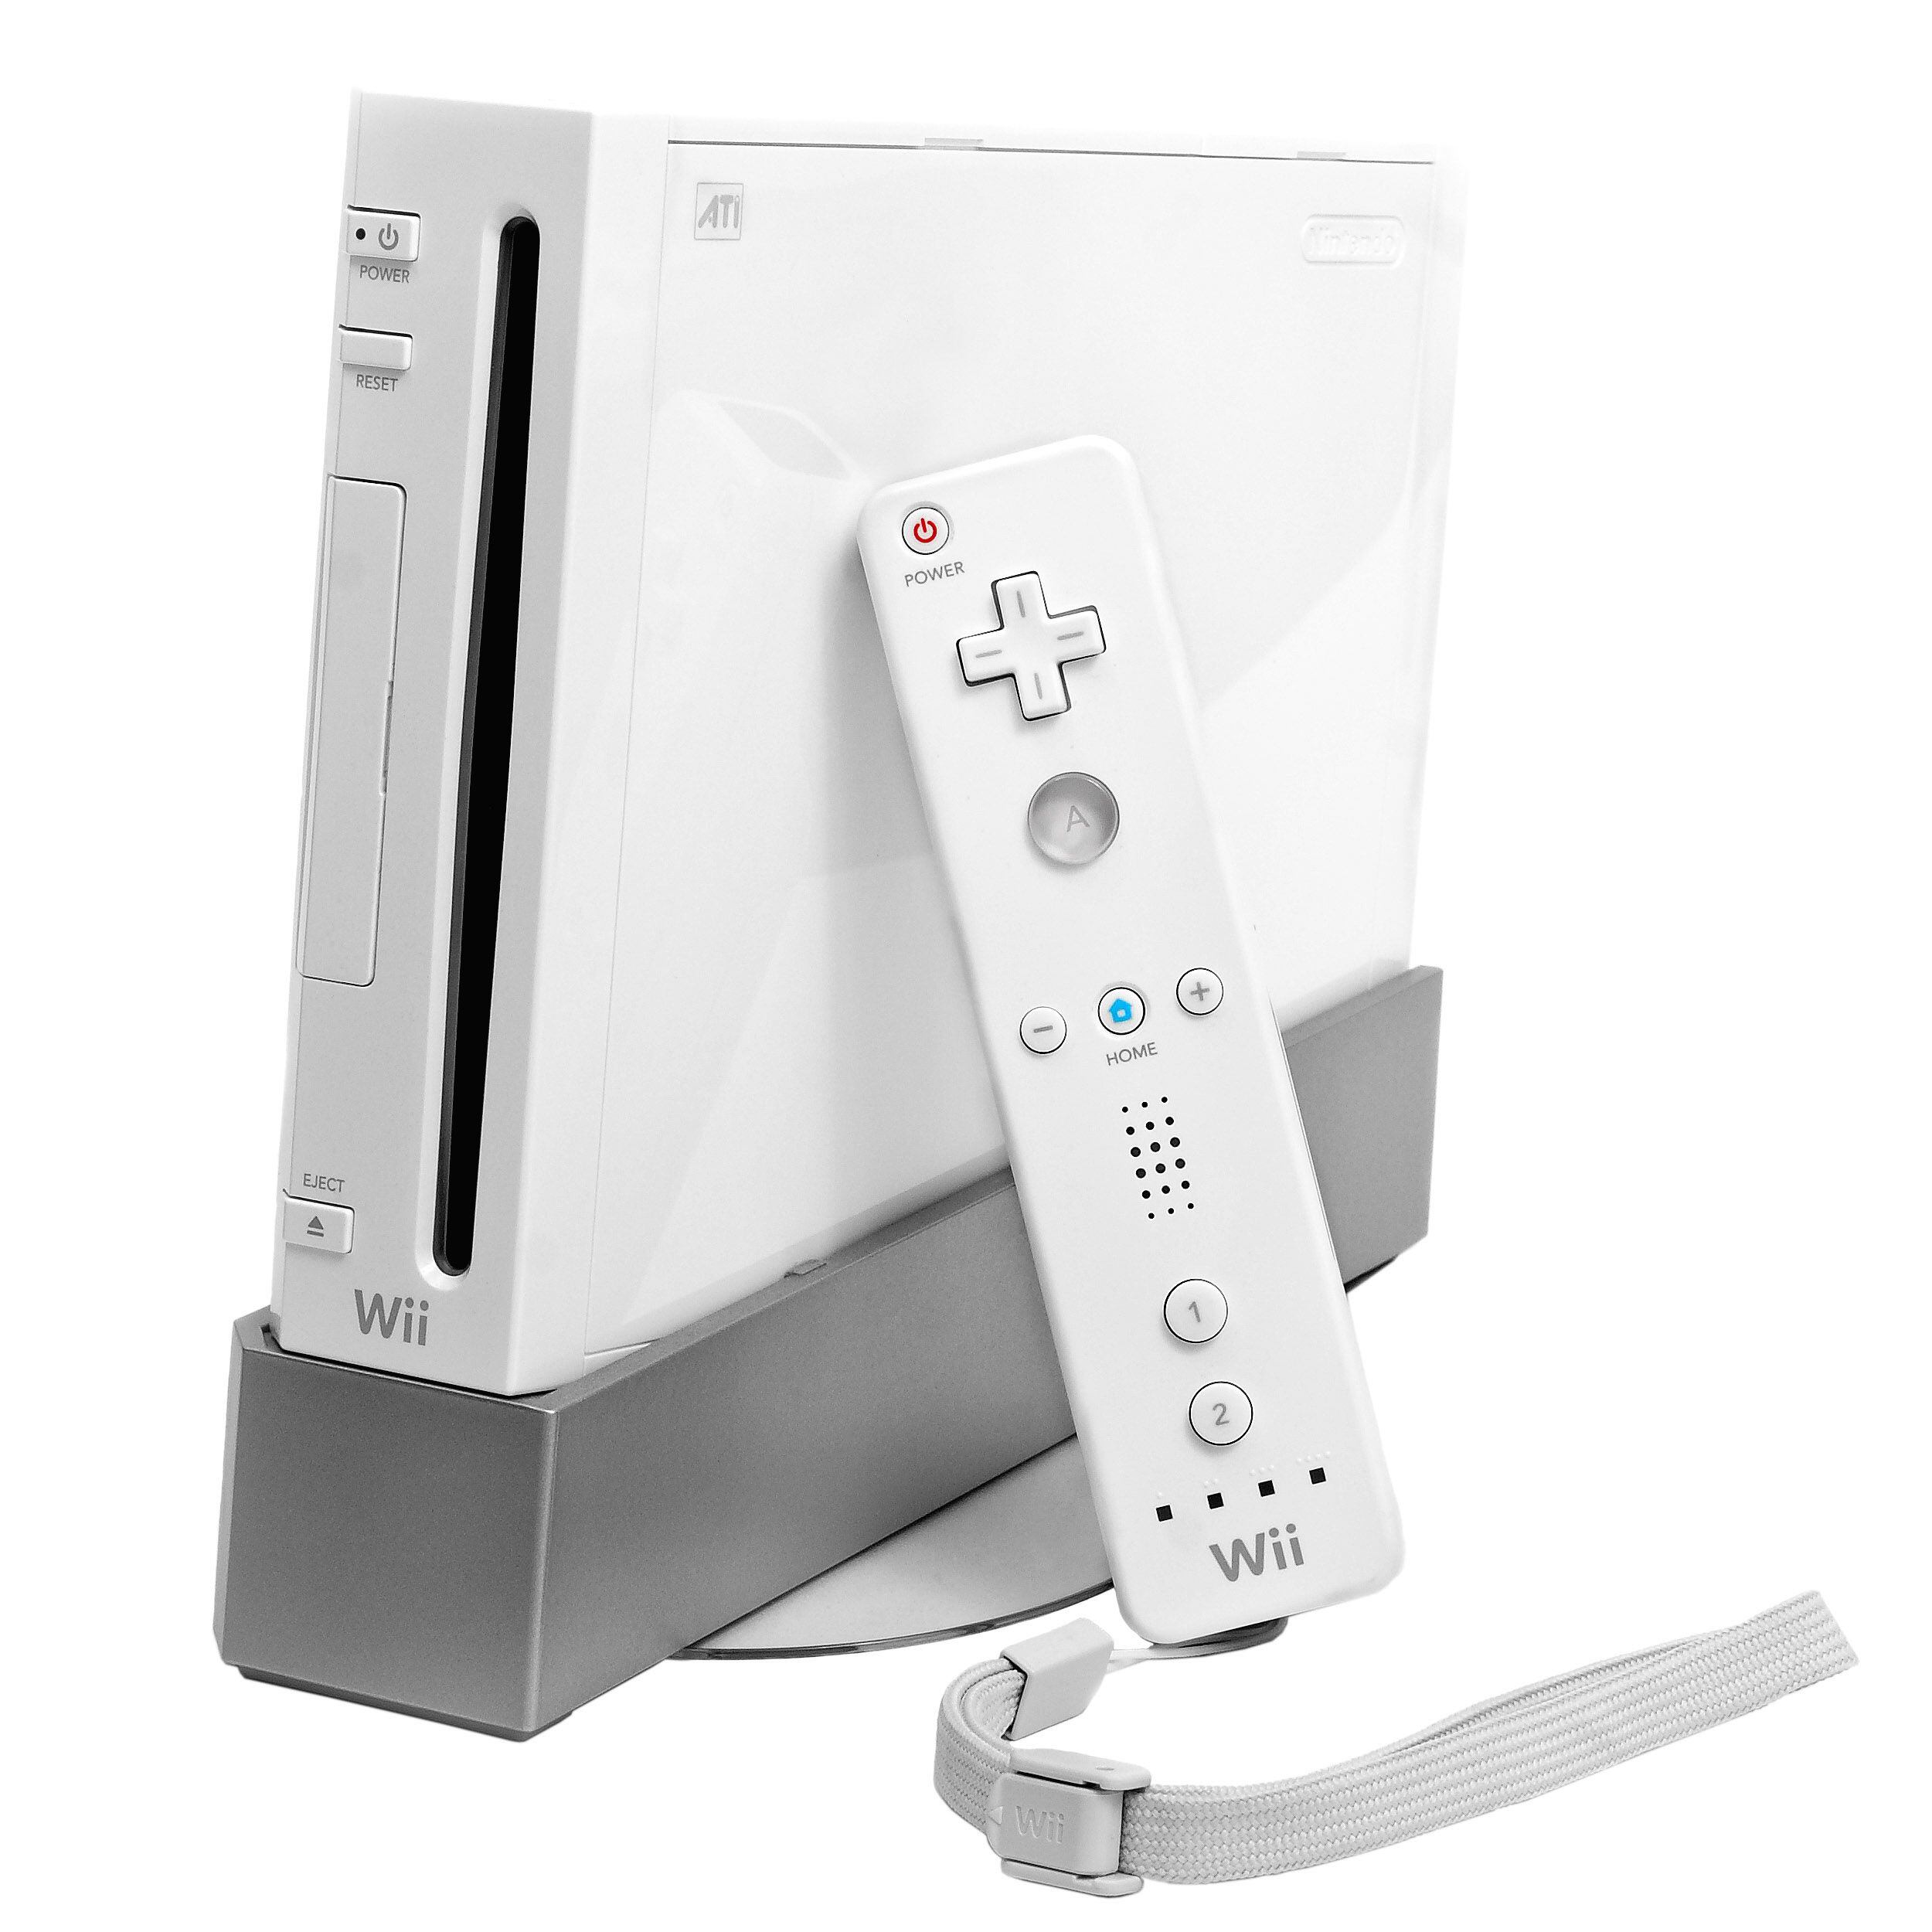 microsoft, nintendo's revolution: how the wii changed gaming forever, 20 years on